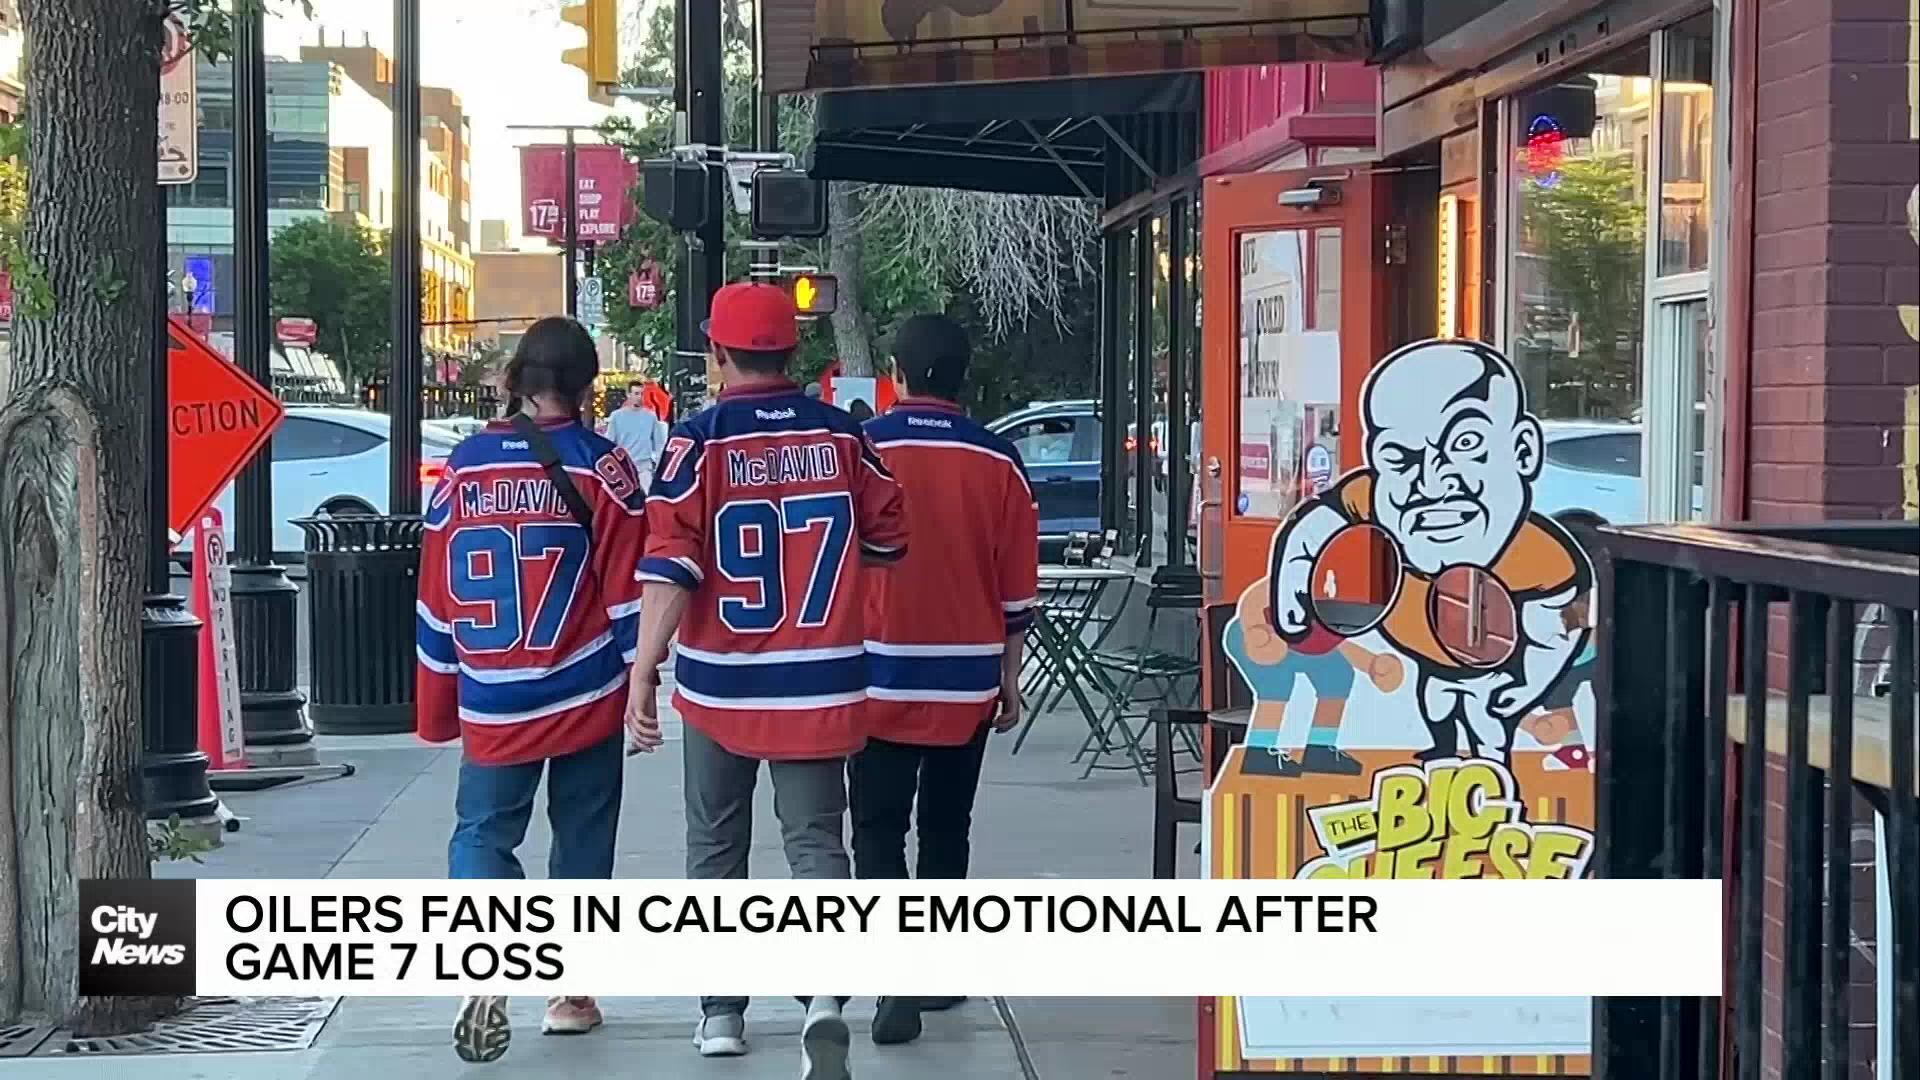 Oilers fans in Calgary emotional after game 7 loss